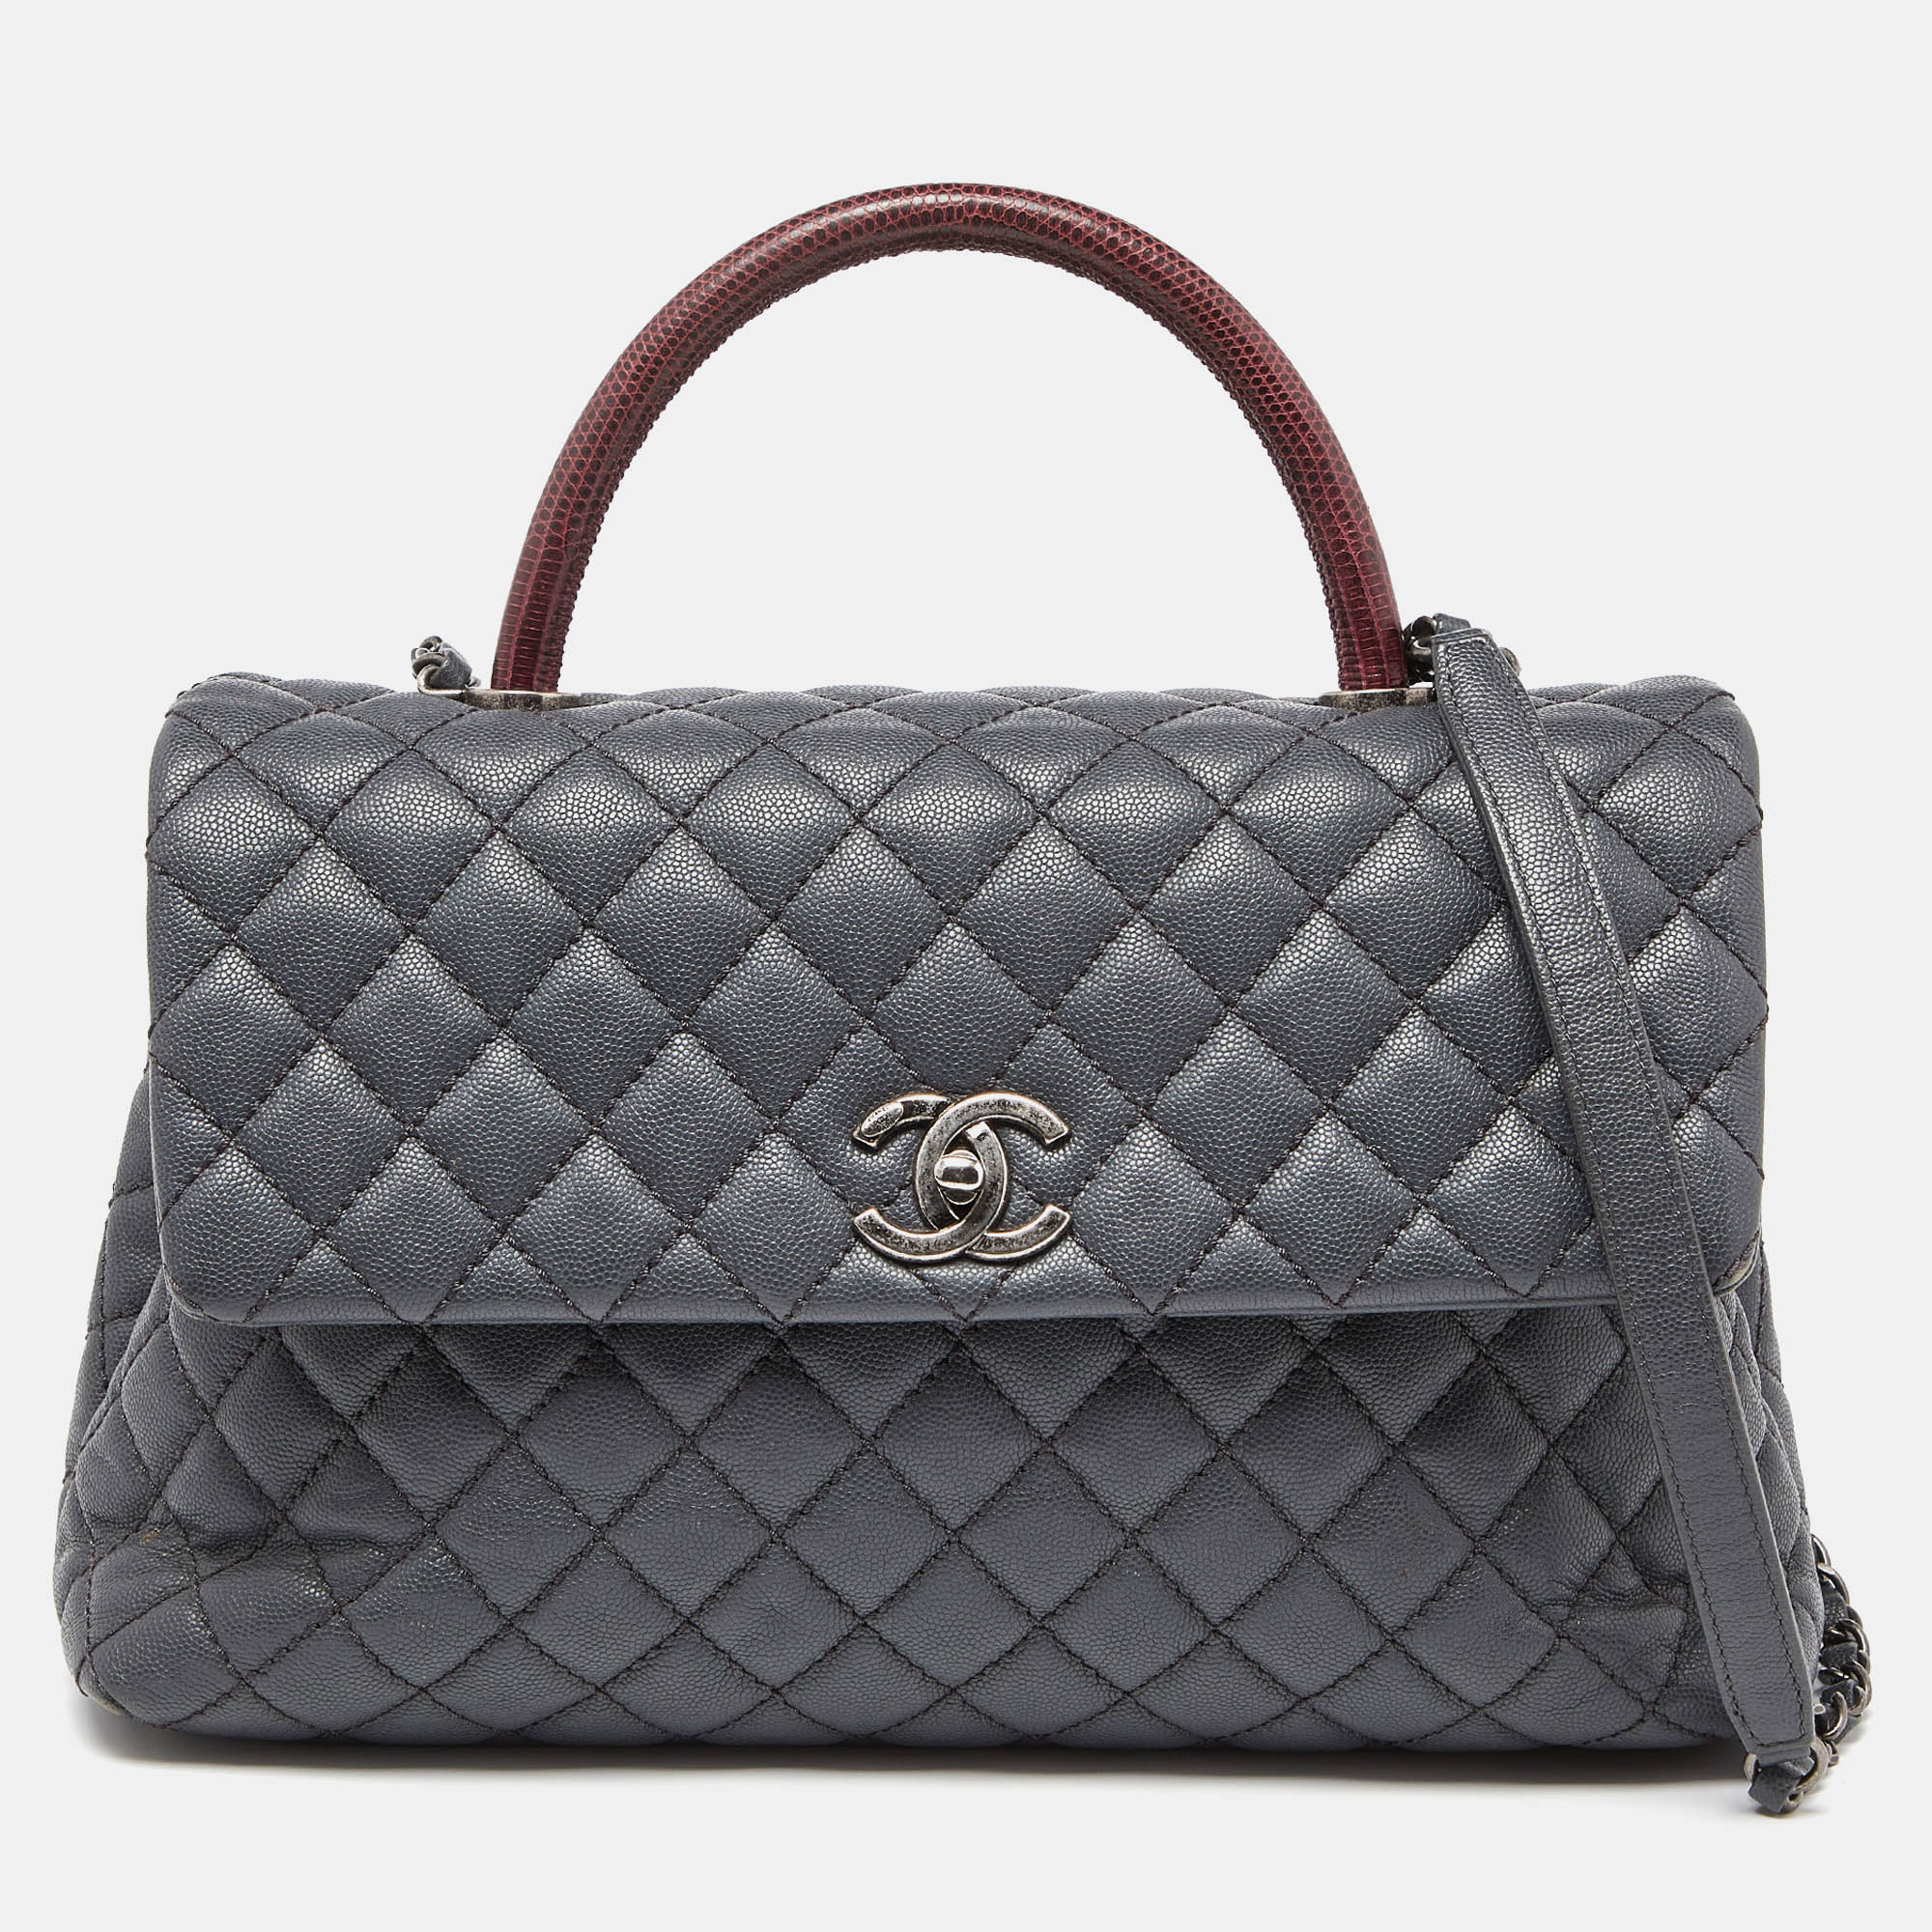 Chanel Grey/Red Caviar Leather And Lizard Leather Medium Coco Top Handle Bag